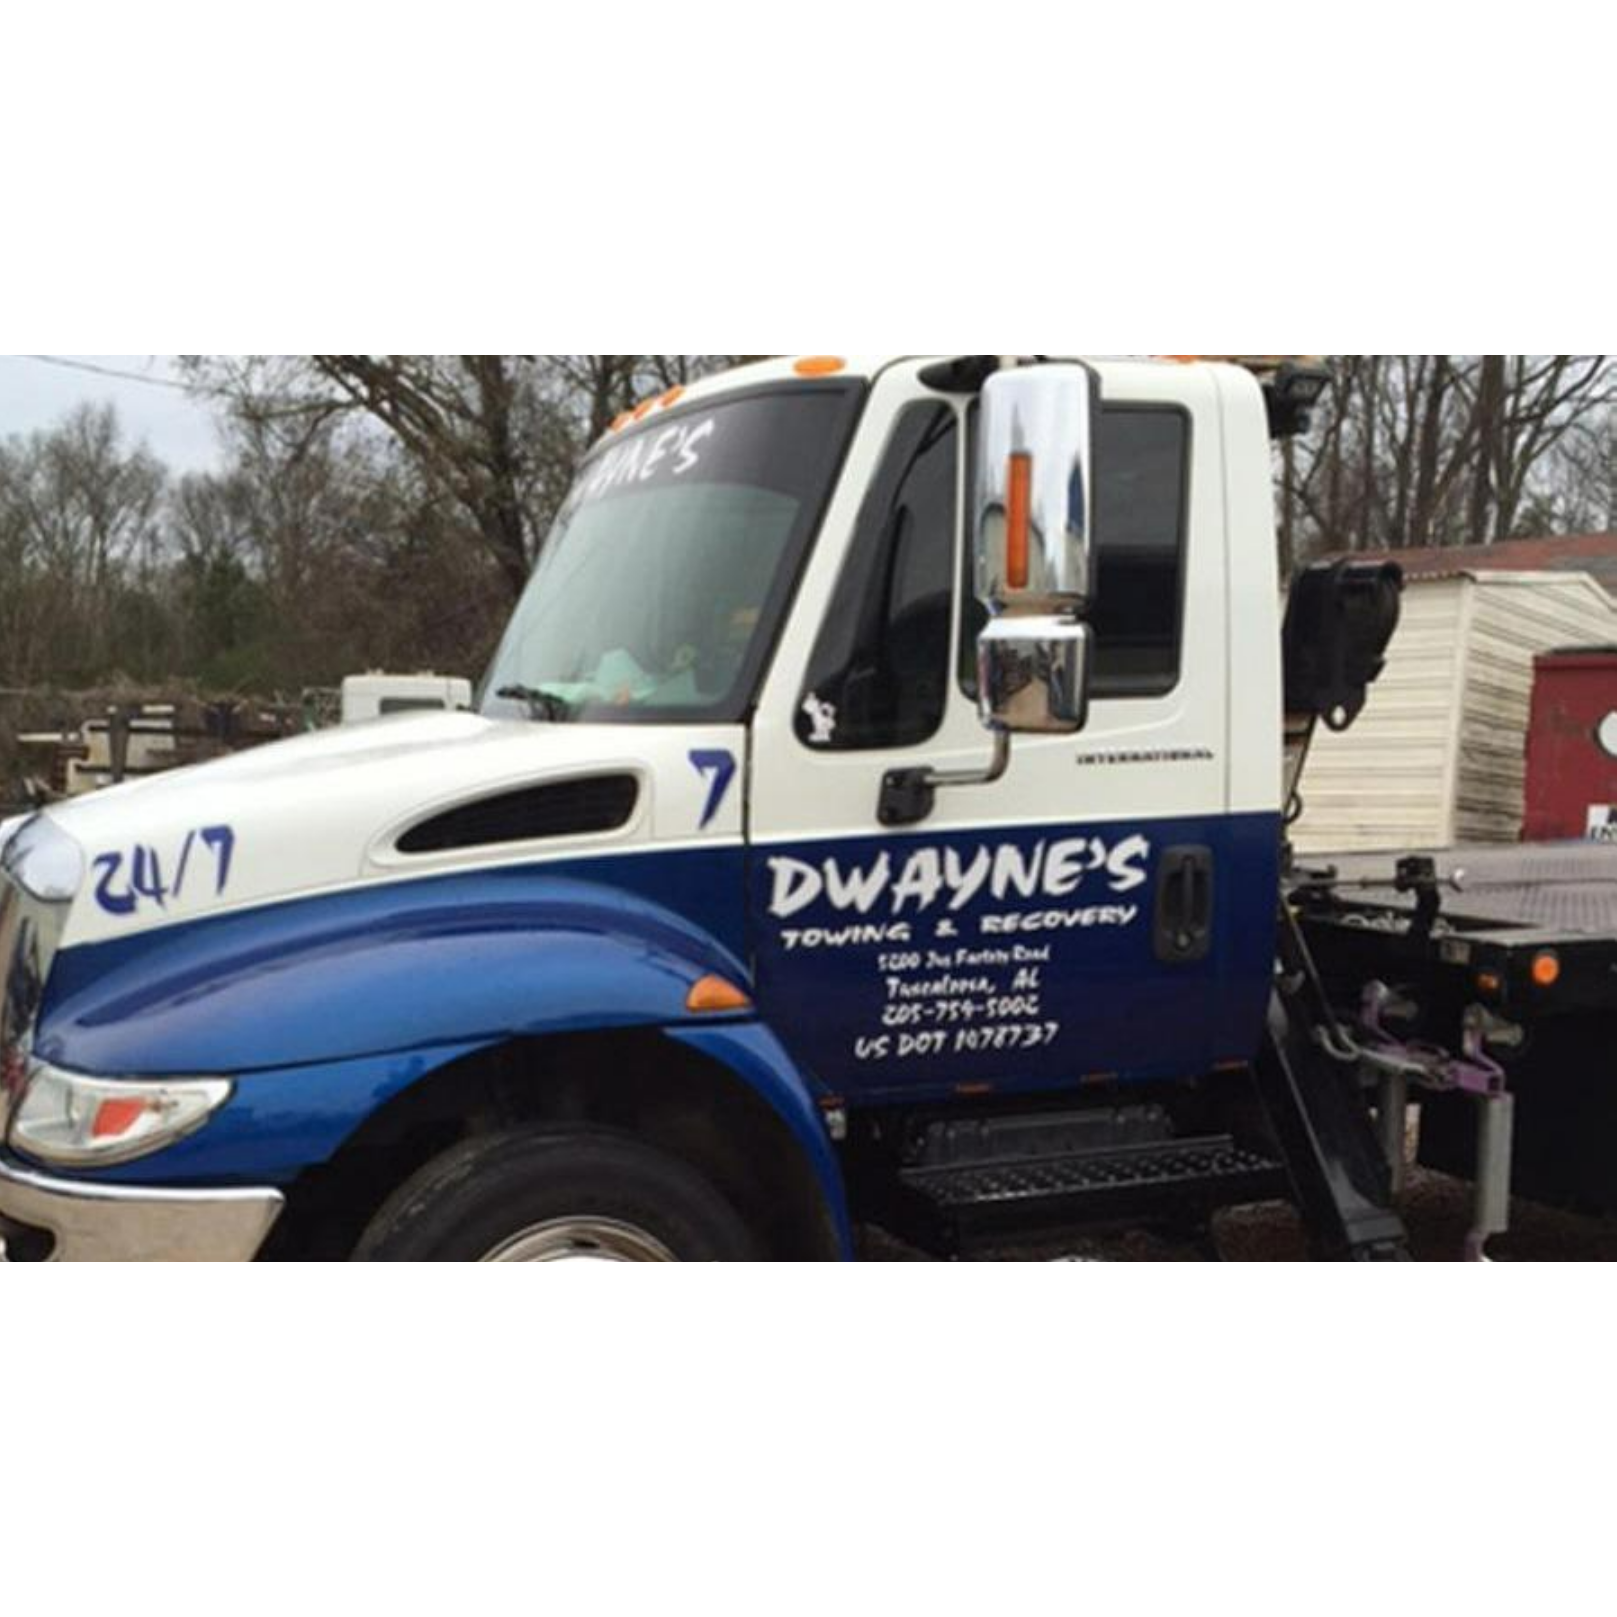 Dwaynes Towing and Recovery - Tuscaloosa, AL 35405 - (205)759-5002 | ShowMeLocal.com